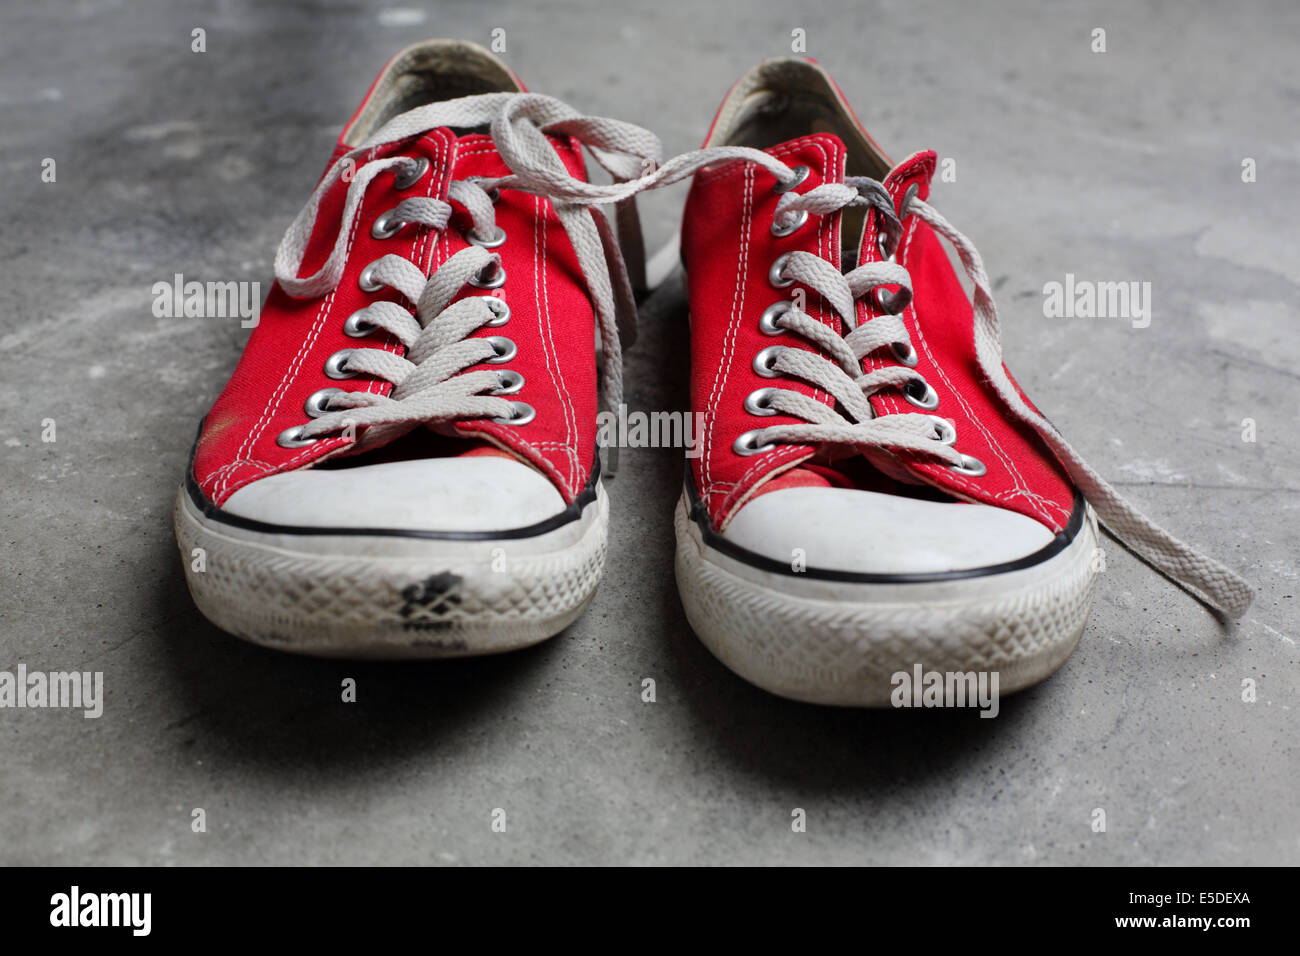 red converse shoes womens